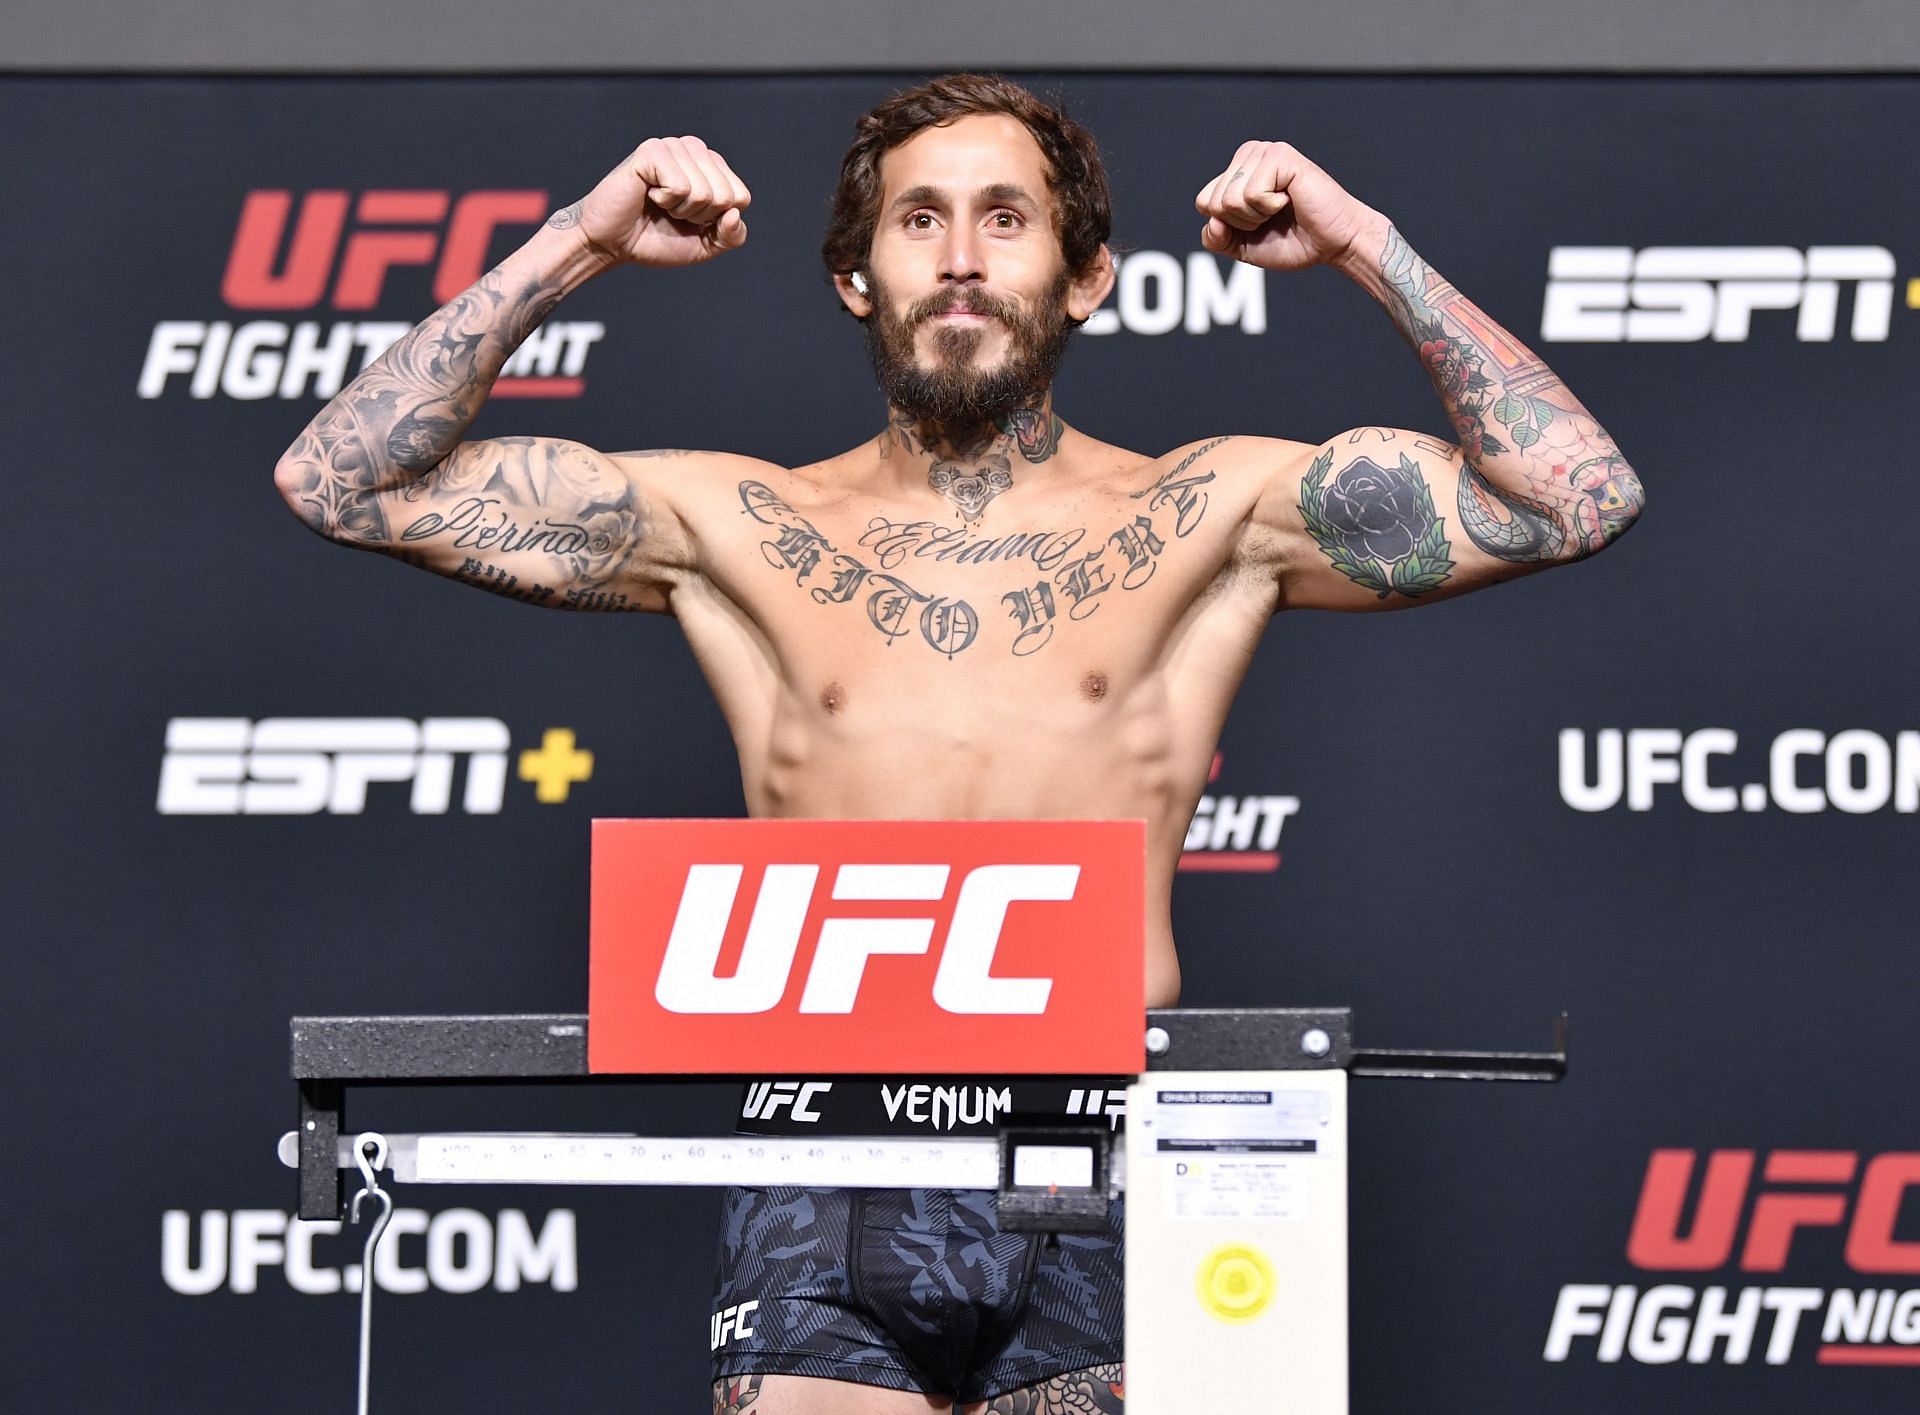 Marlon &#039;Chito&#039; Vera at UFC Fight Night: The Korean Zombie v Ige Weigh-in